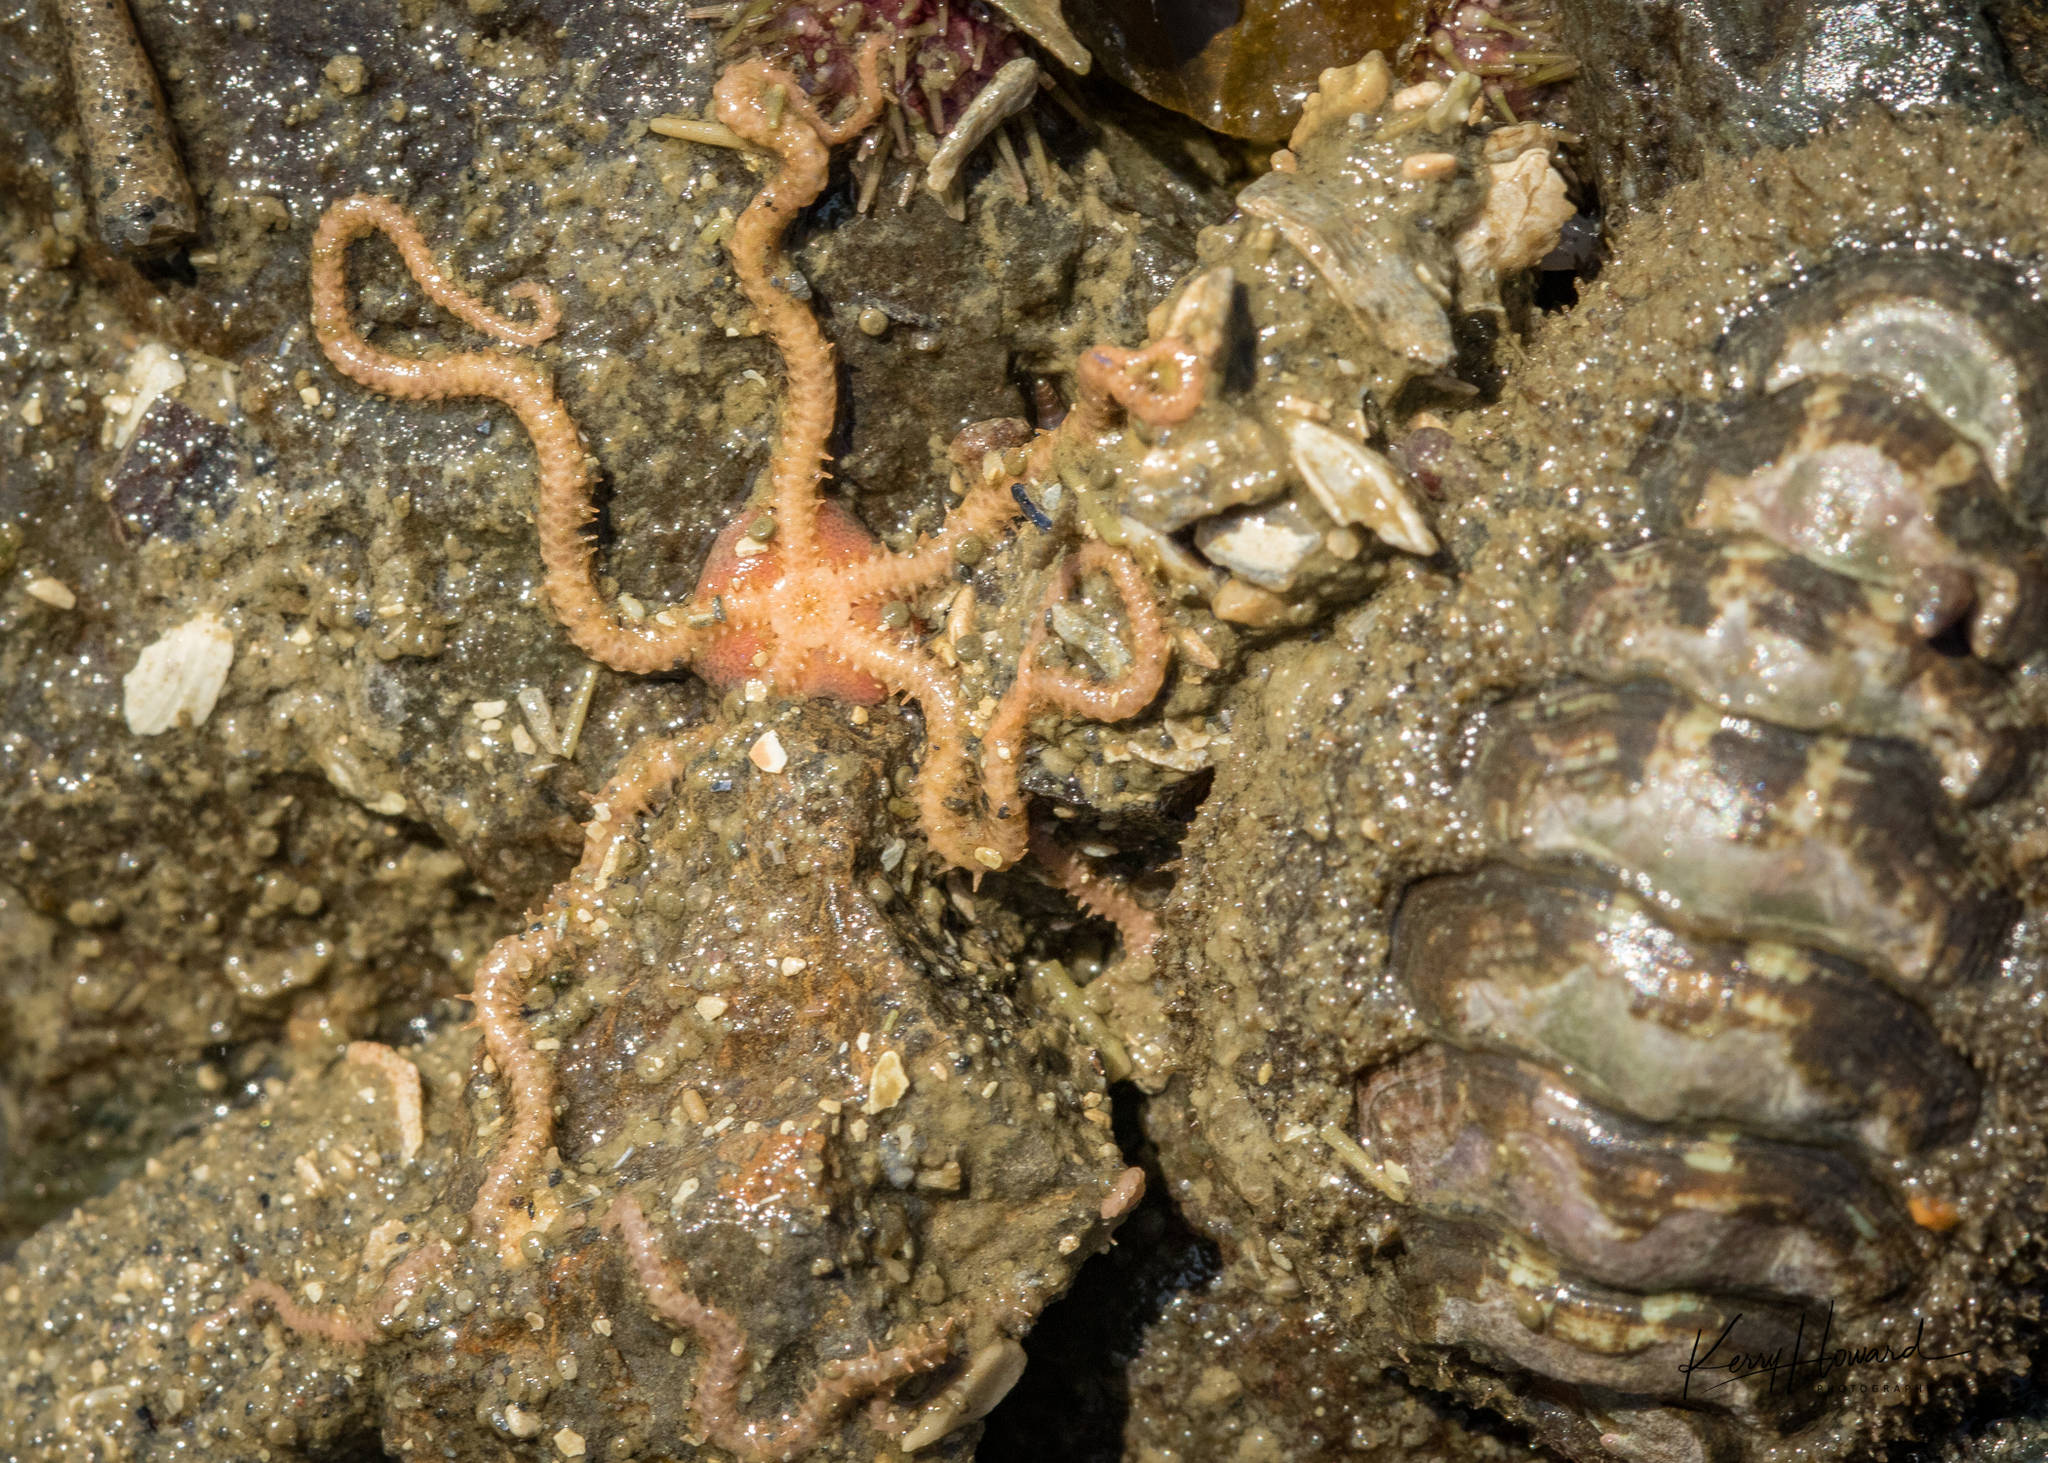 A long-armed brittlestar clings to the underside of a rock, sharing the space with a chiton and other inhabitants. (Photo by Kerry Howard)